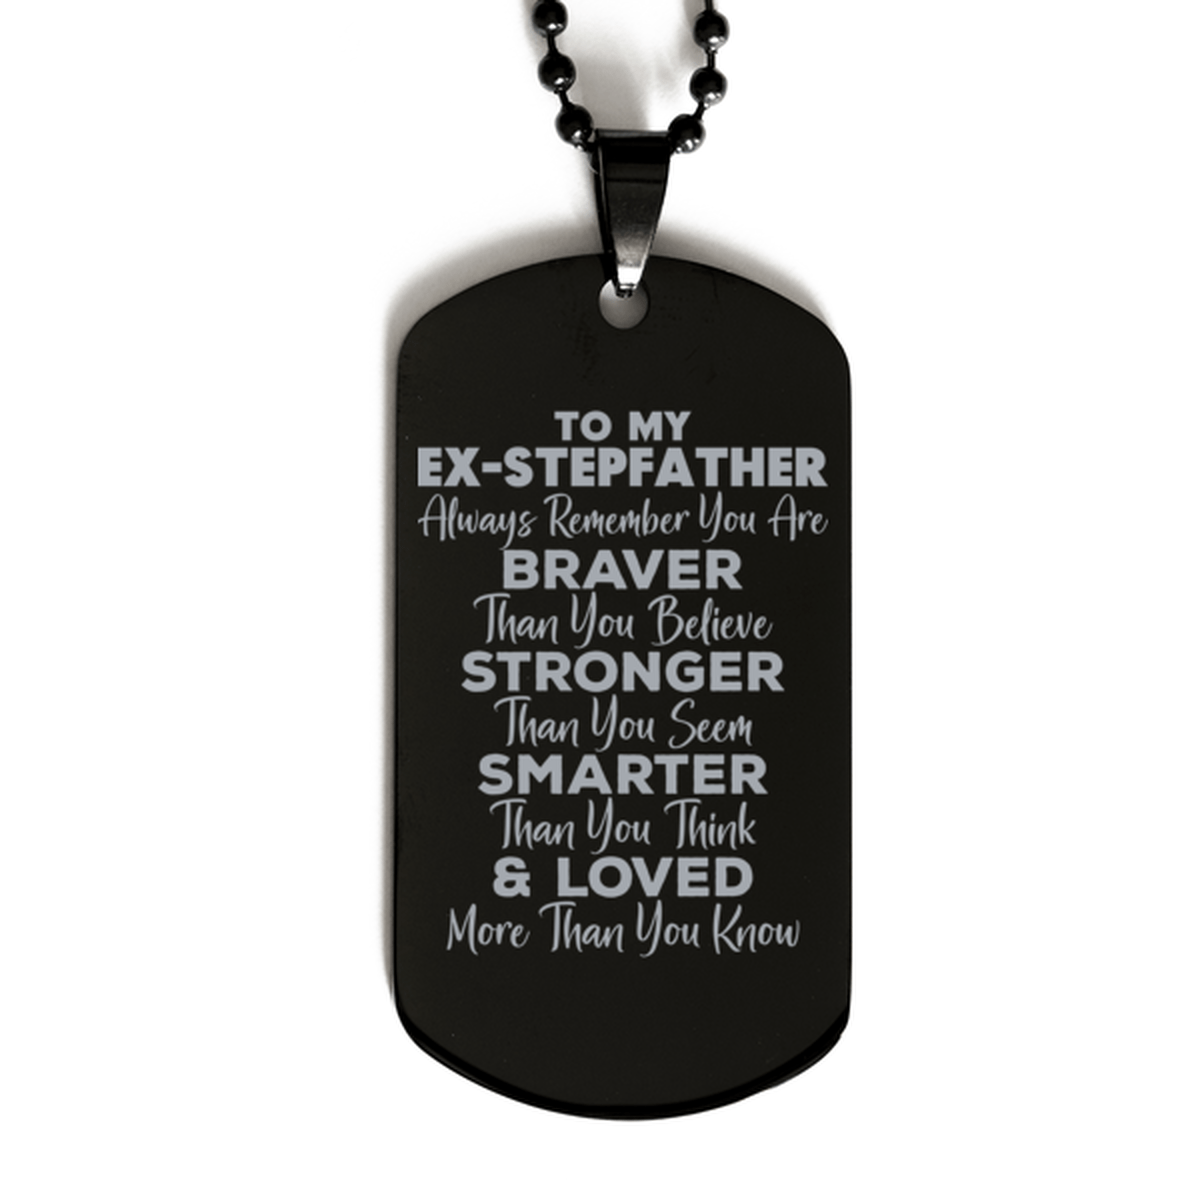 Motivational Ex-stepfather Black Dog Tag Necklace, Ex-stepfather Always Remember You Are Braver Than You Believe, Best Birthday Gifts for Ex-stepfather